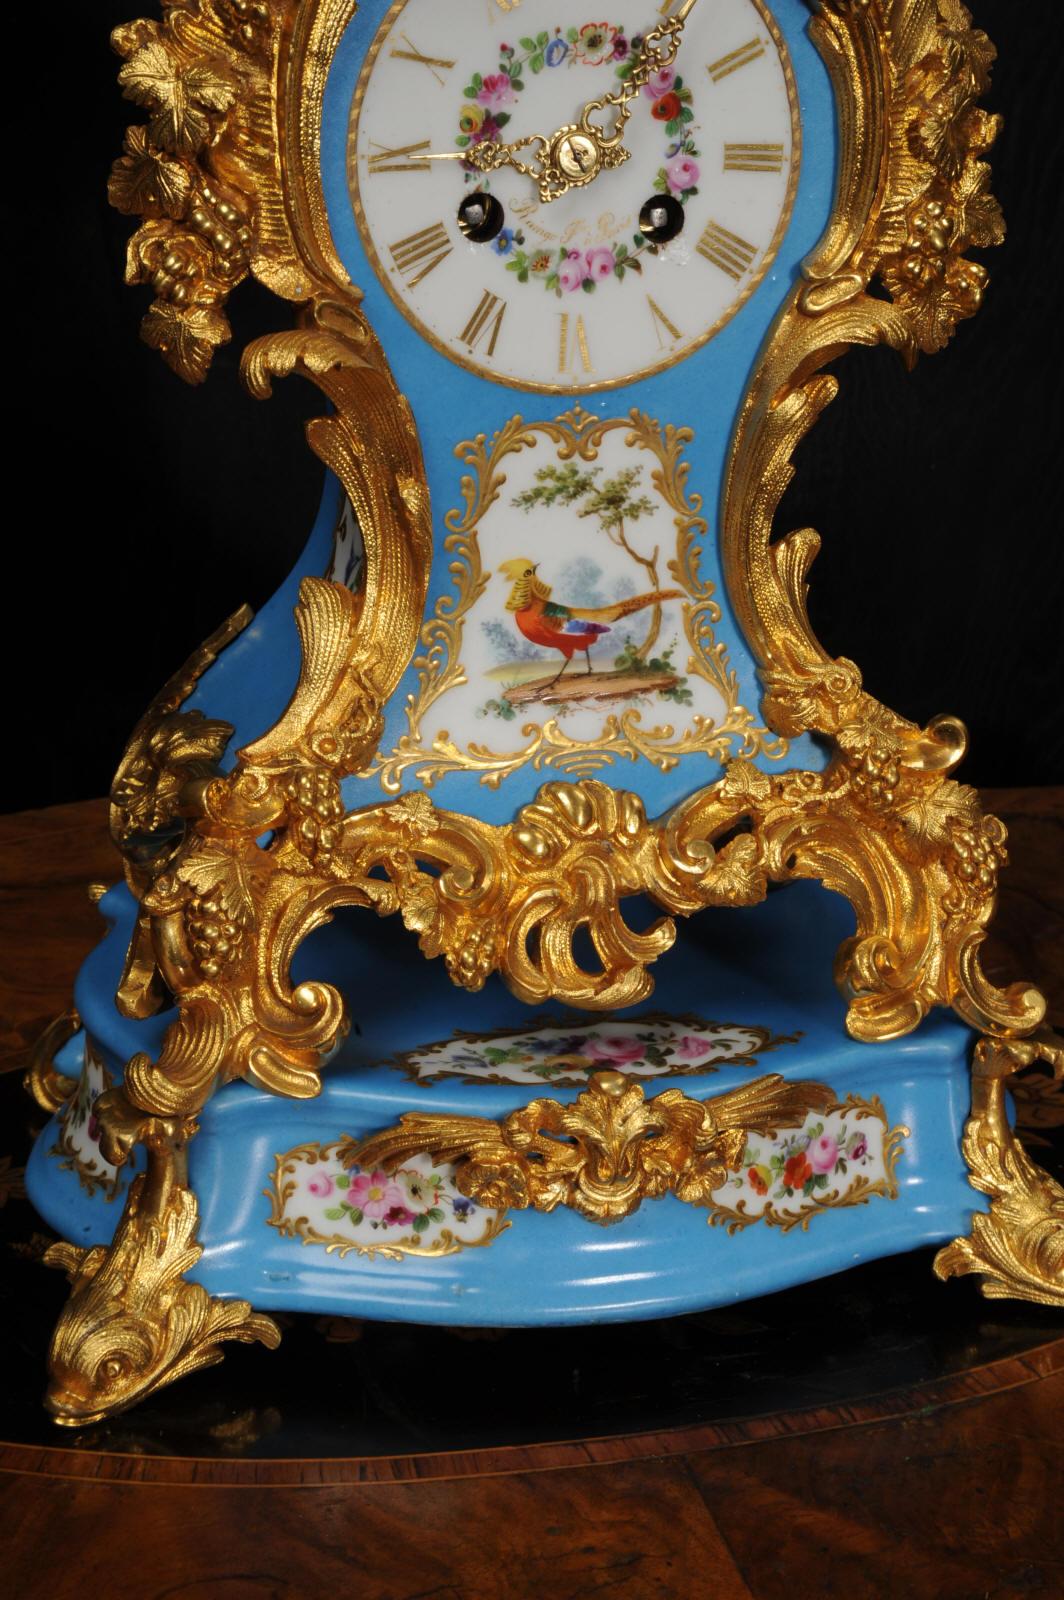 19th Century Early Ormolu and Porcelain Antique French Clock by Raingo Freres